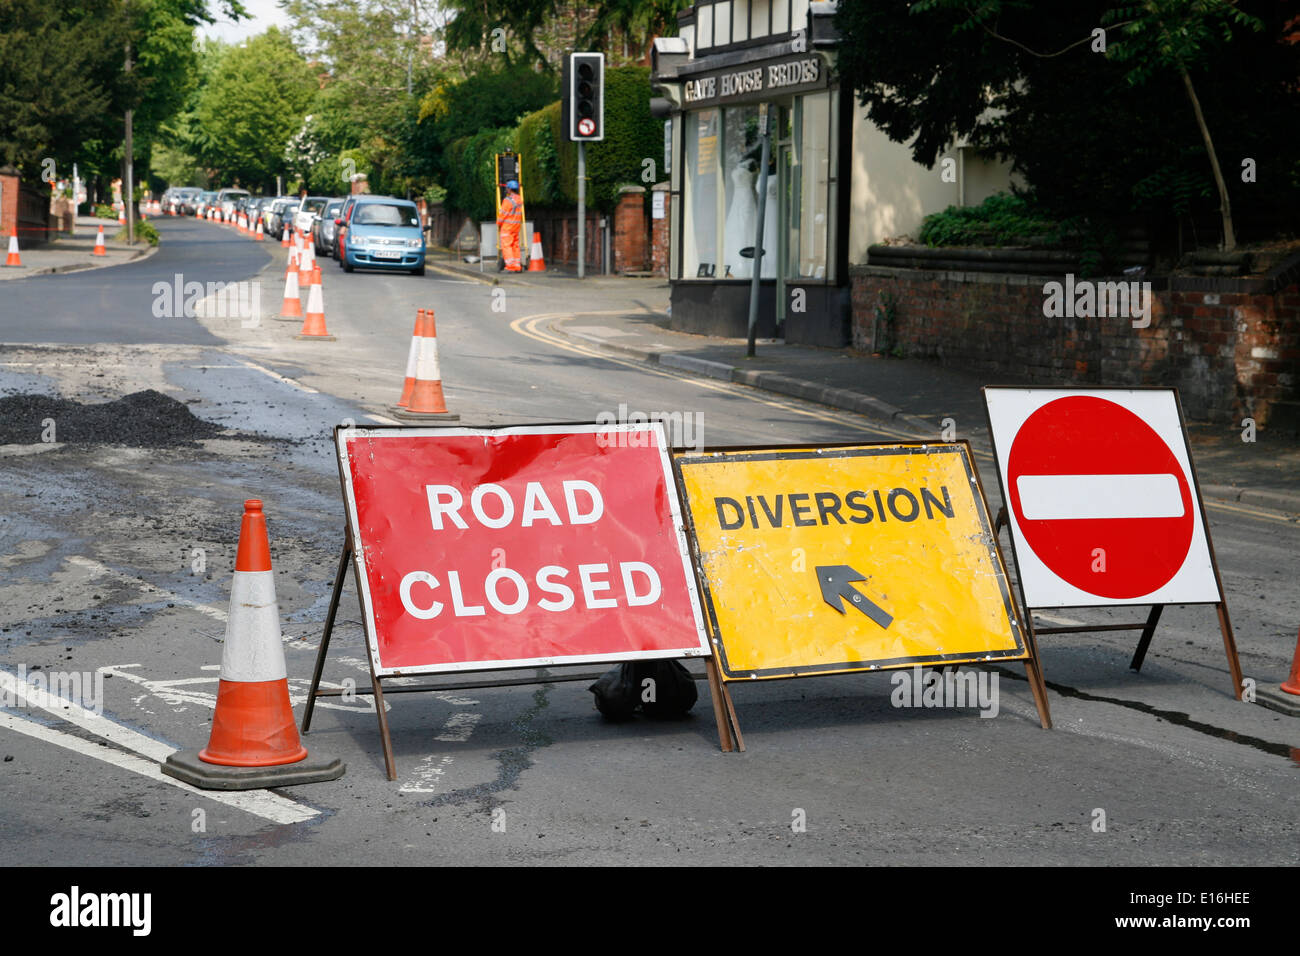 Road Works Road Closed Diversion No Entry signs Worcester Worcestershire England UK Stock Photo